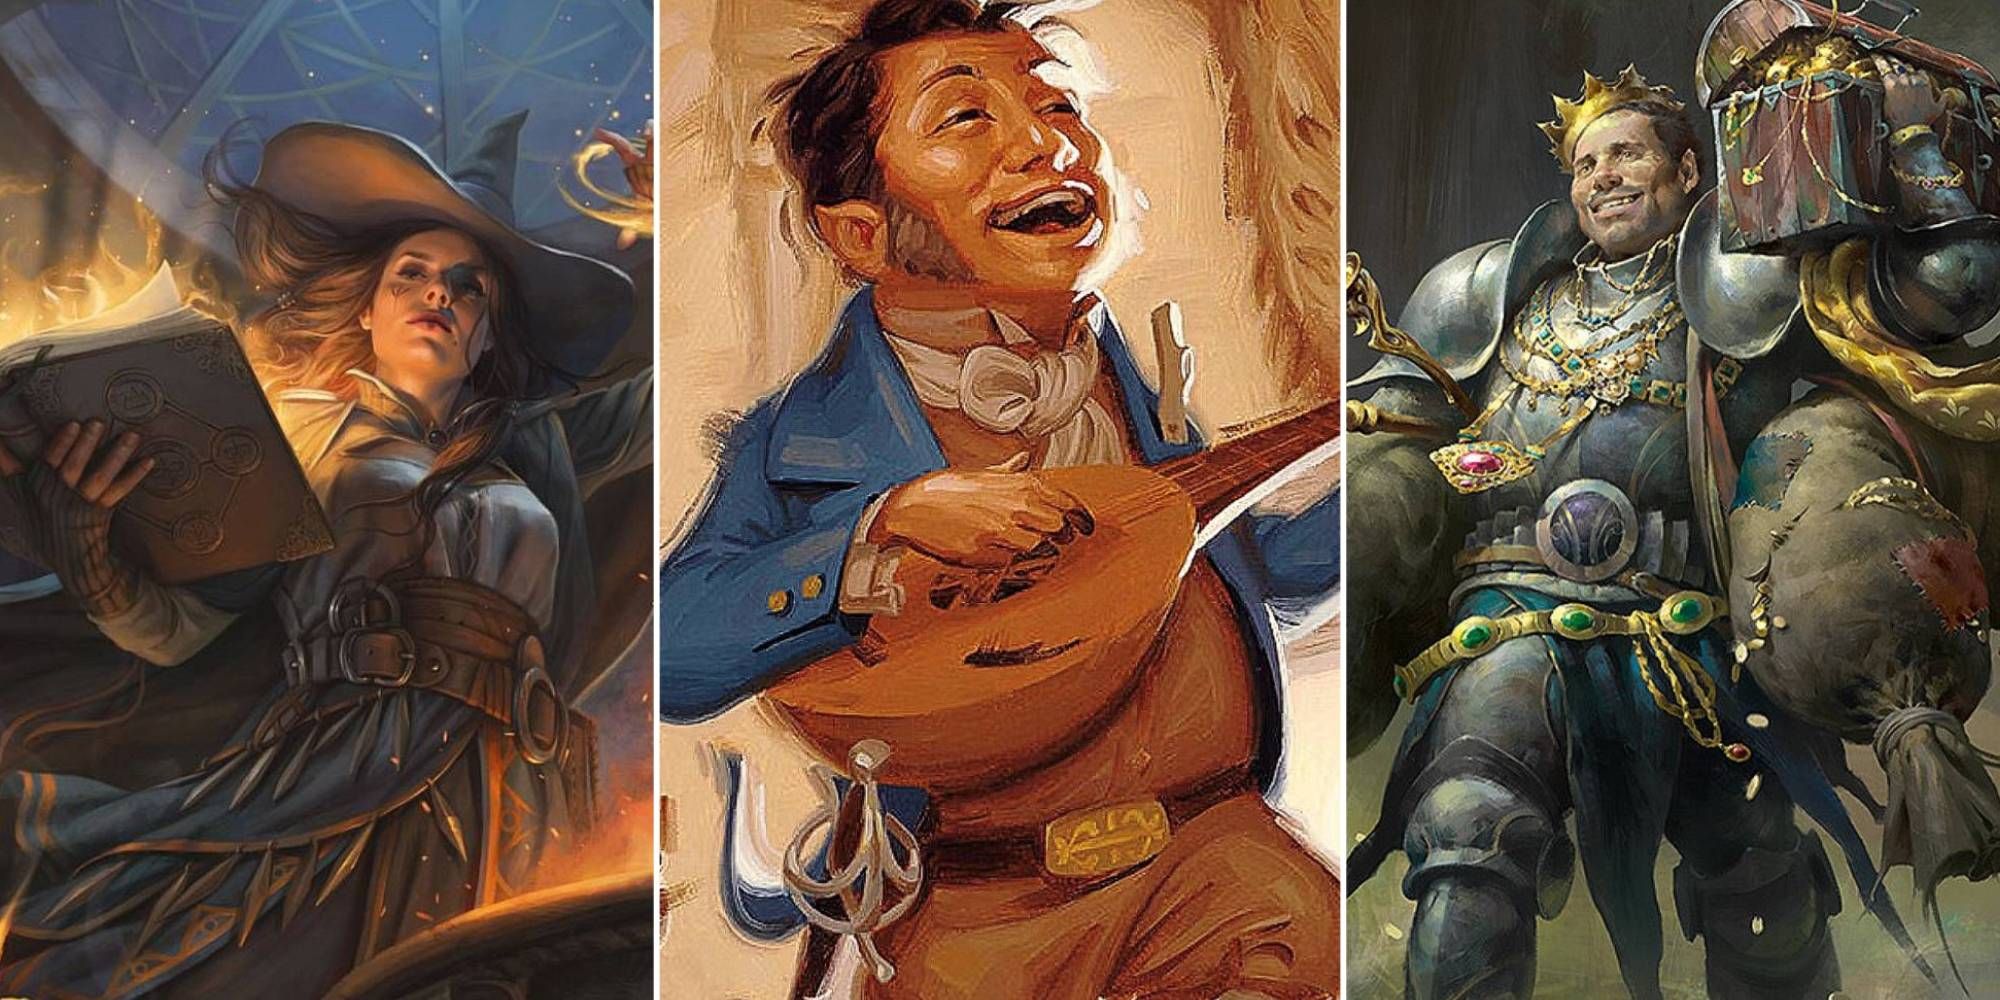 A collage of Dungeons & Dragons artwork including Tasha, a Halfling Bard and a rich adventurer